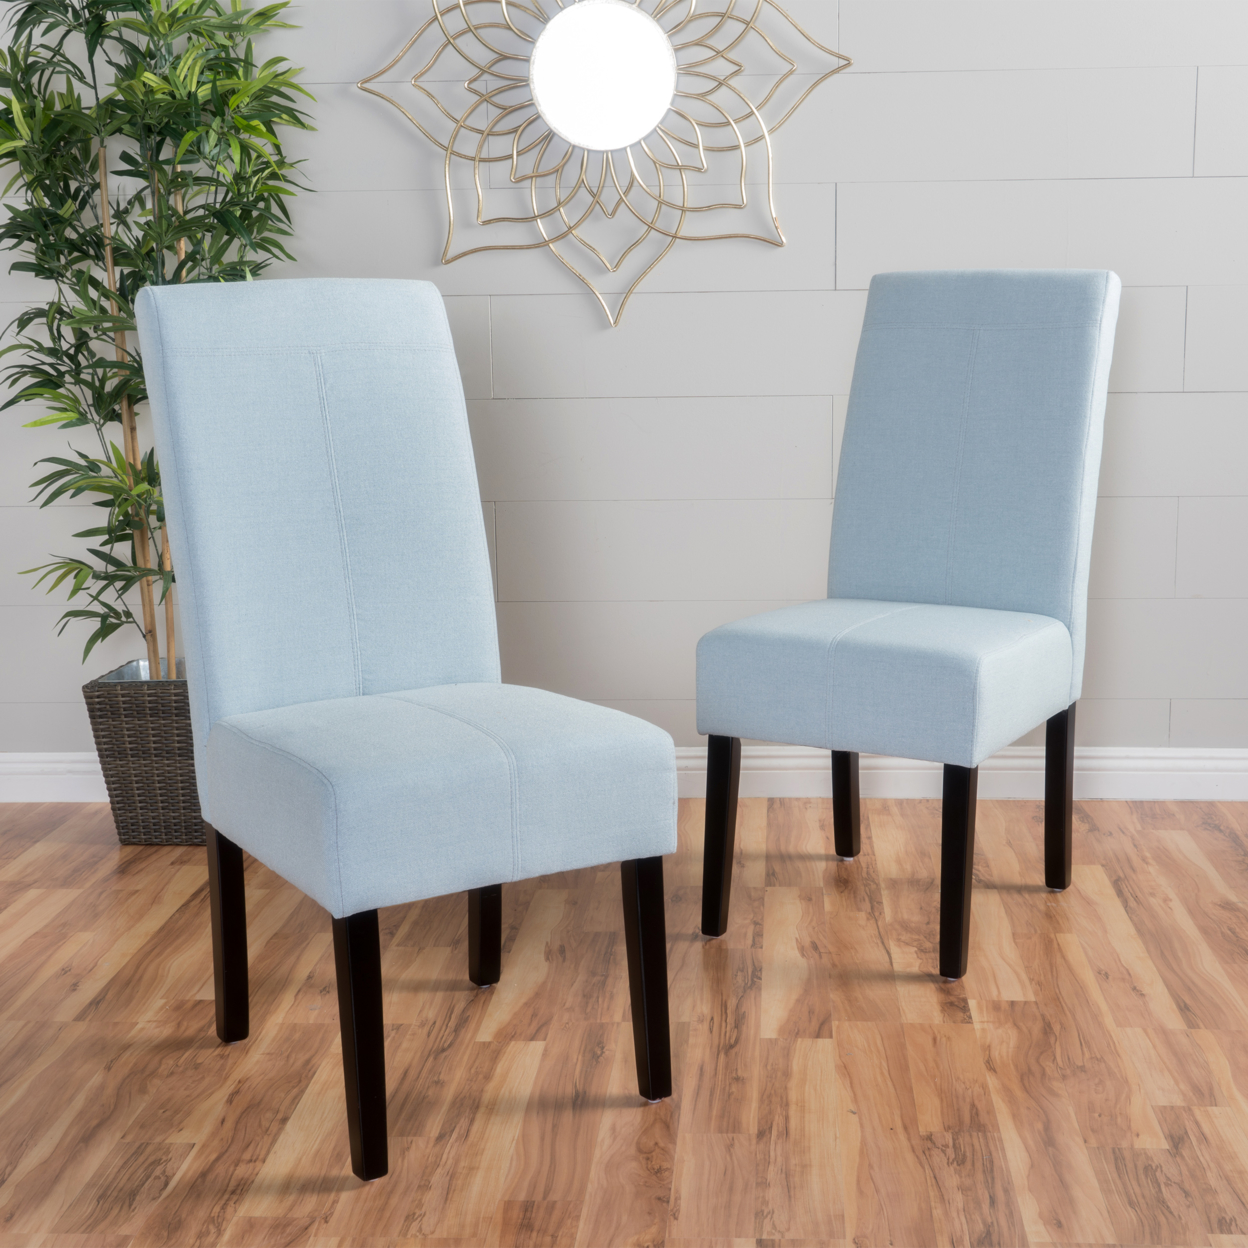 Lissa Contemporary T-Stitch Upholstered Dining Chairs (Set Of 2) - Blue, Fabric